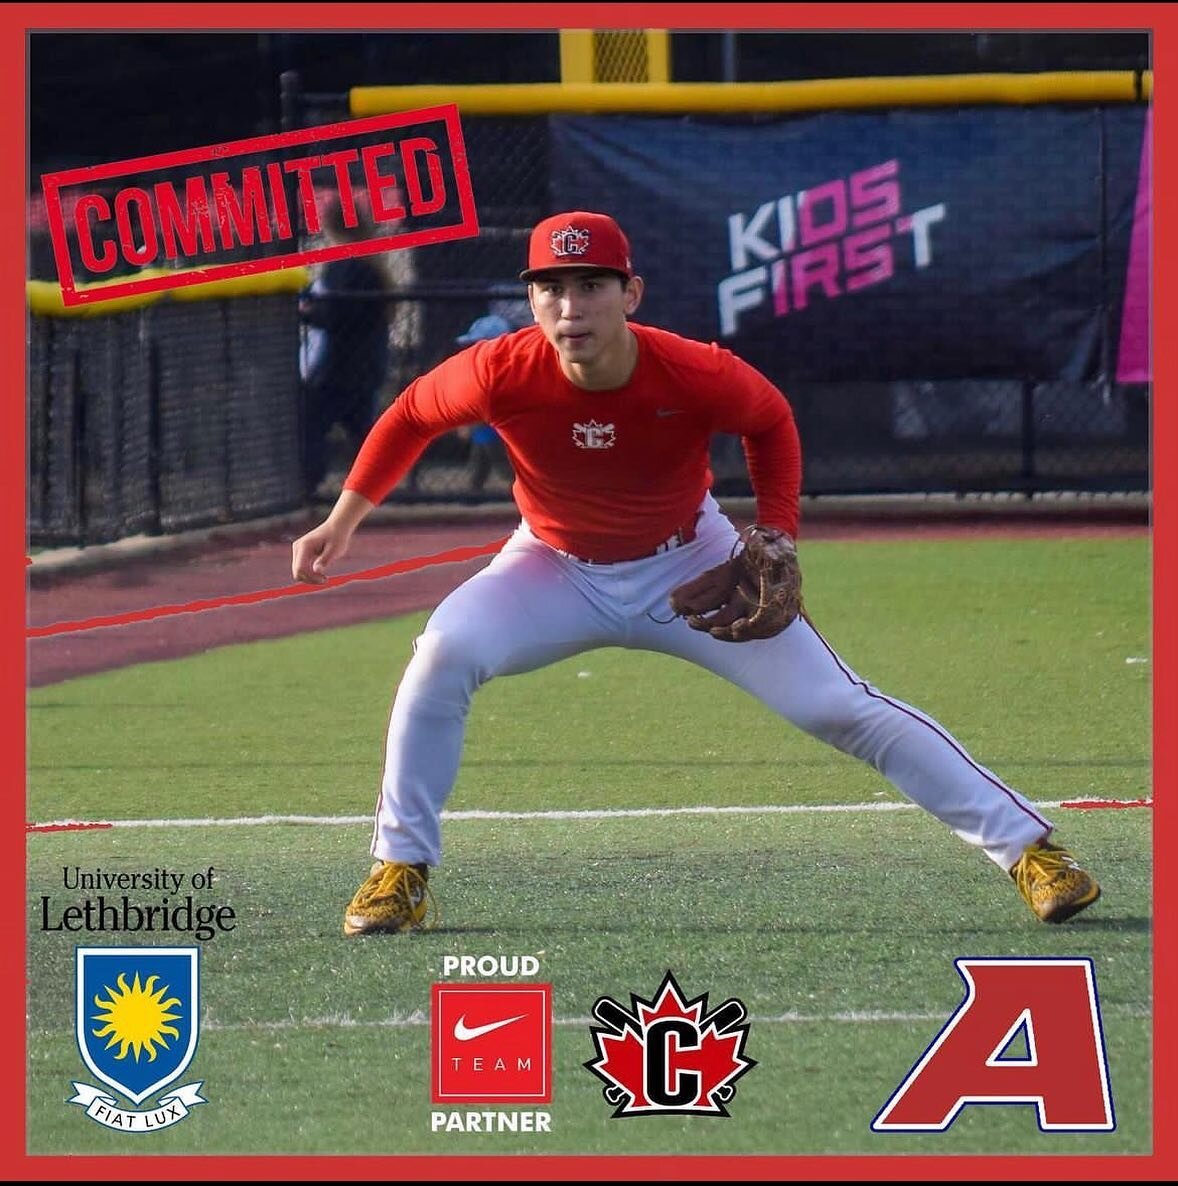 Congrats to ONC and Fitquest Athlete Adrian Yamazaki on committing to the University of Lethbridge / Prairie Baseball Academy.  Yama is an athlete that is going to thrive at the next level athletically and academically.  Can&rsquo;t wait to watch him